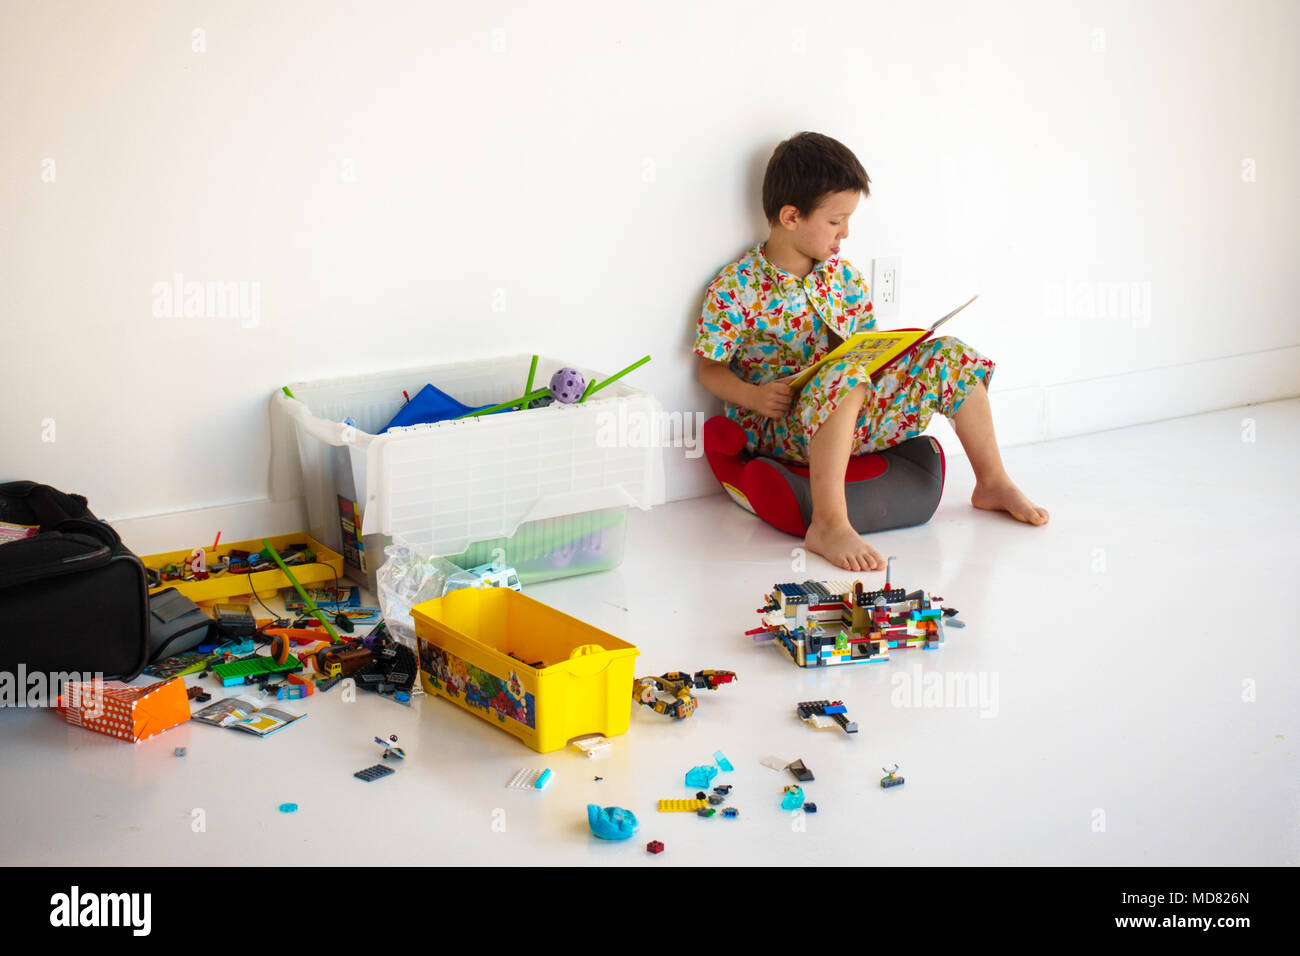 Little boy reading story books during play time Stock Photo